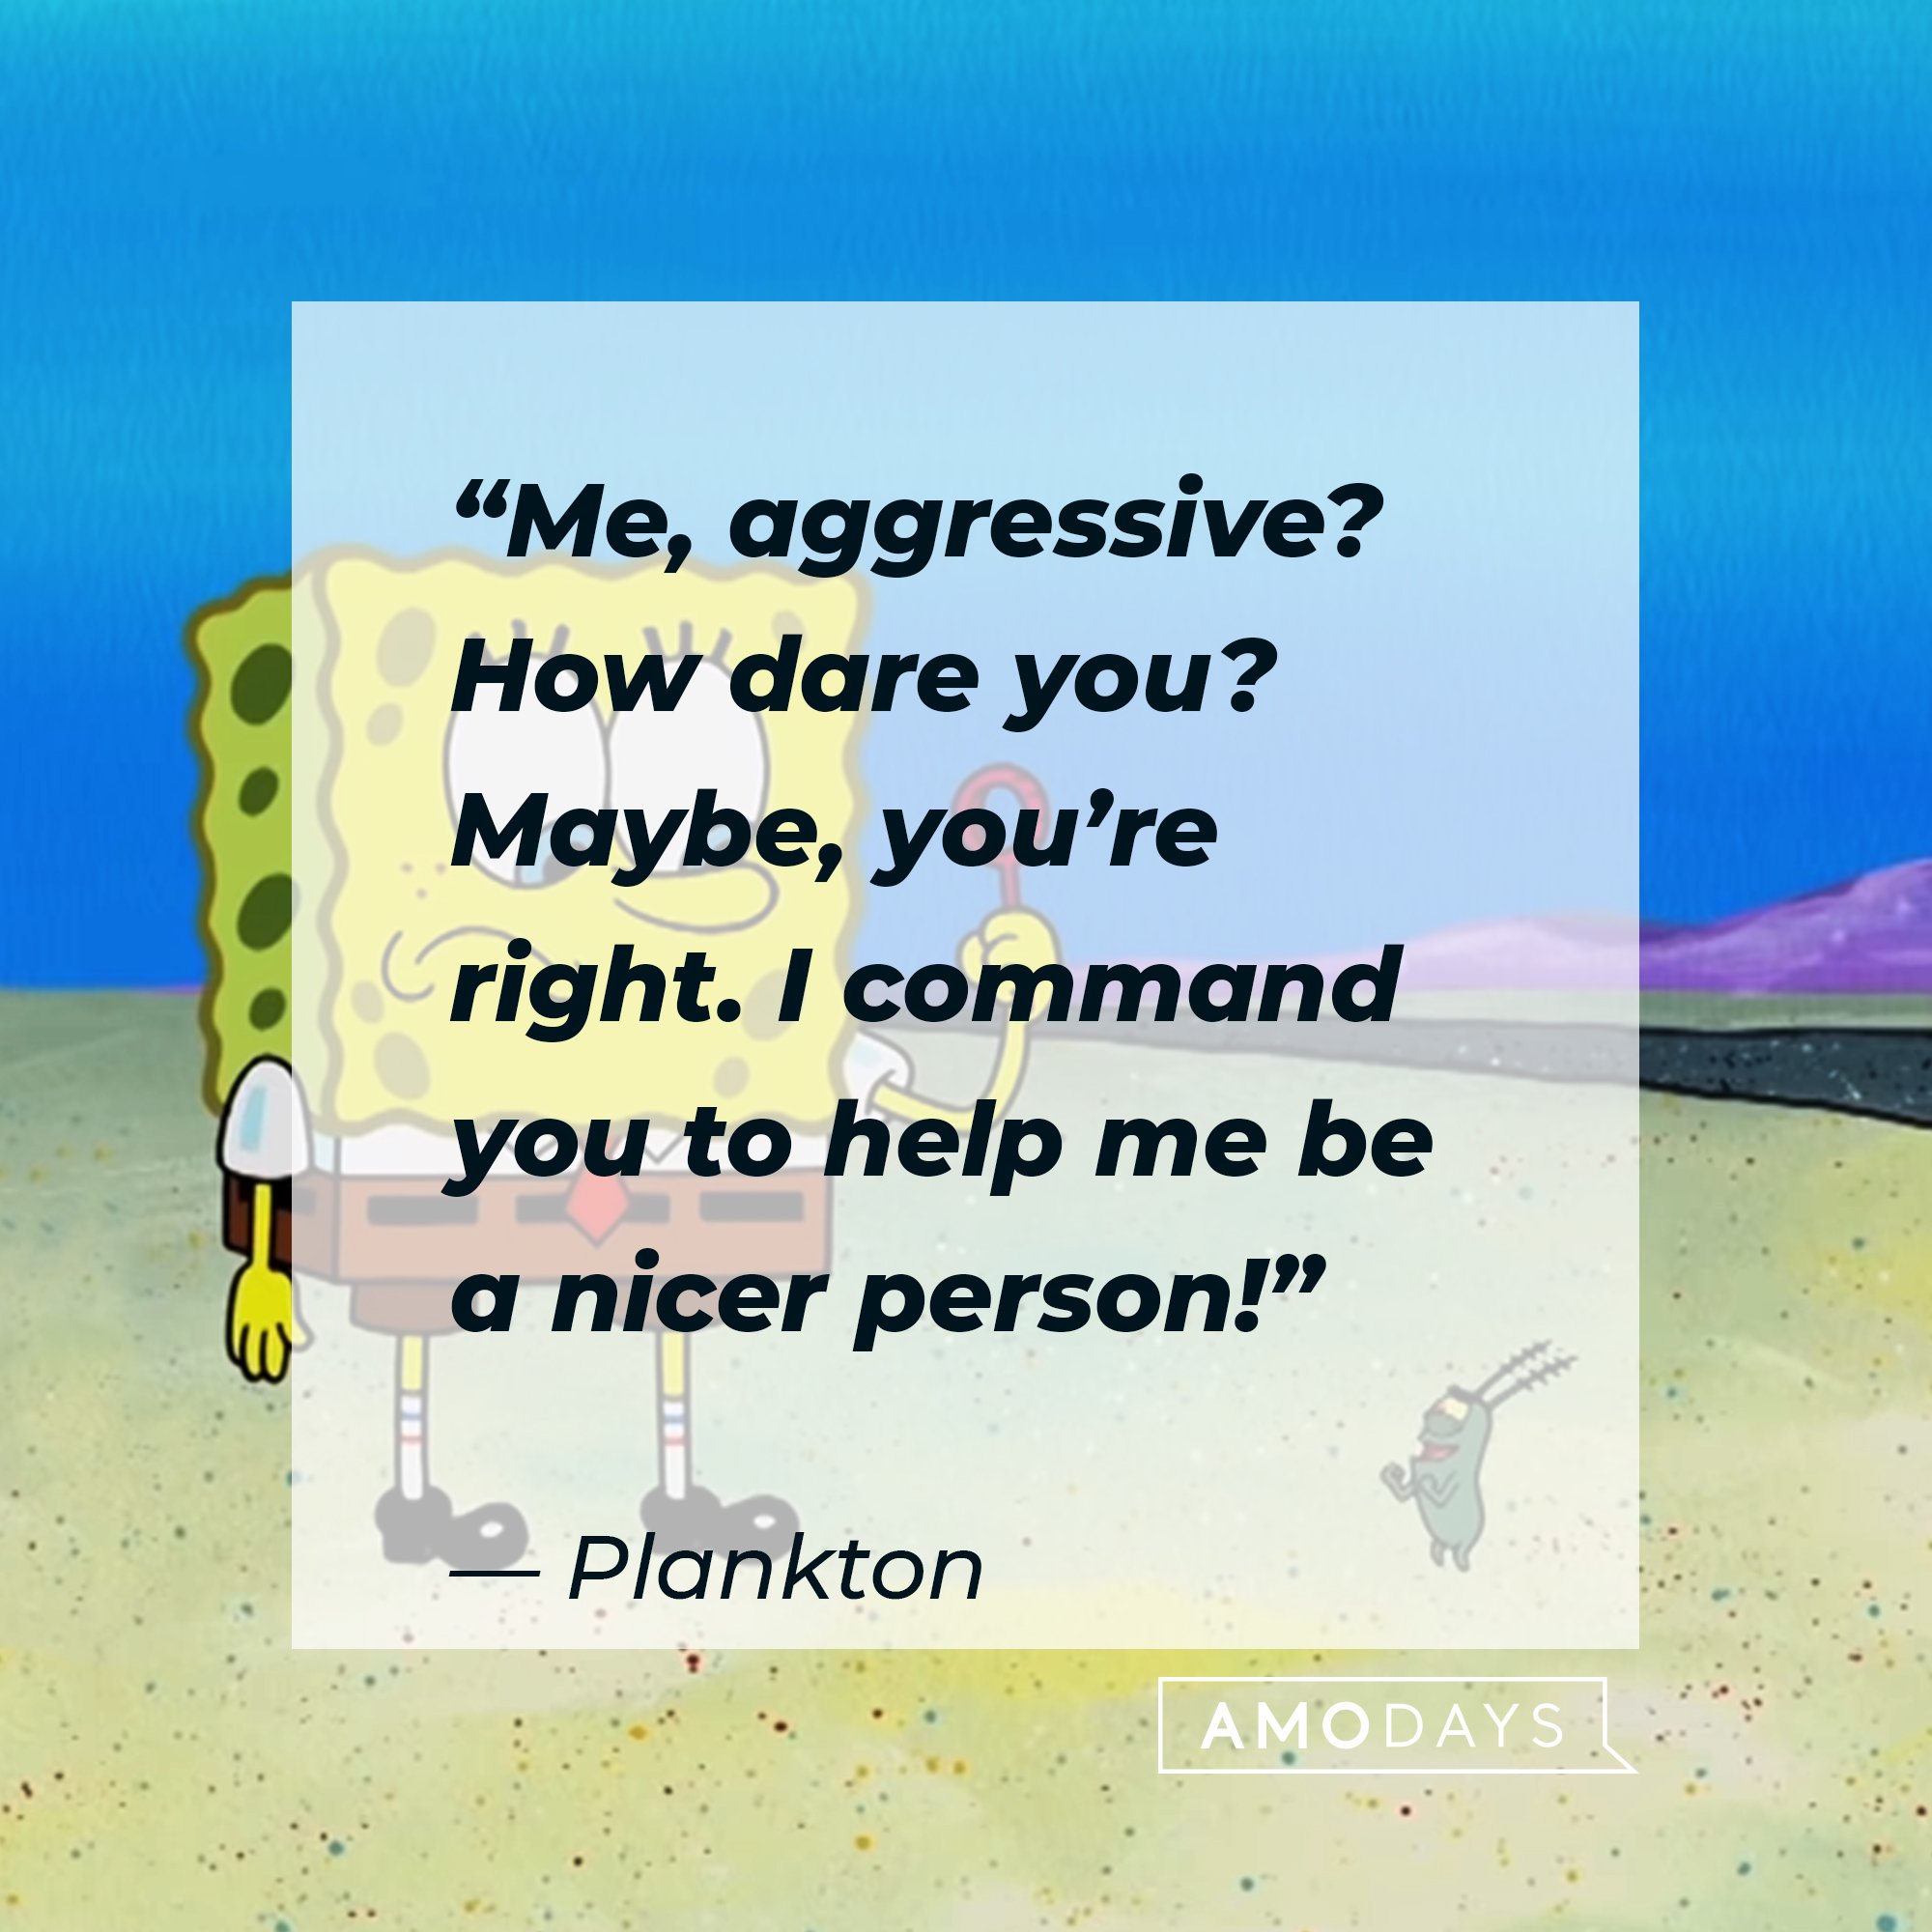 Planton's quote: “Me, aggressive? How dare you? Maybe, you’re right. I command you to help me be a nicer person!” | Image: AmoDays